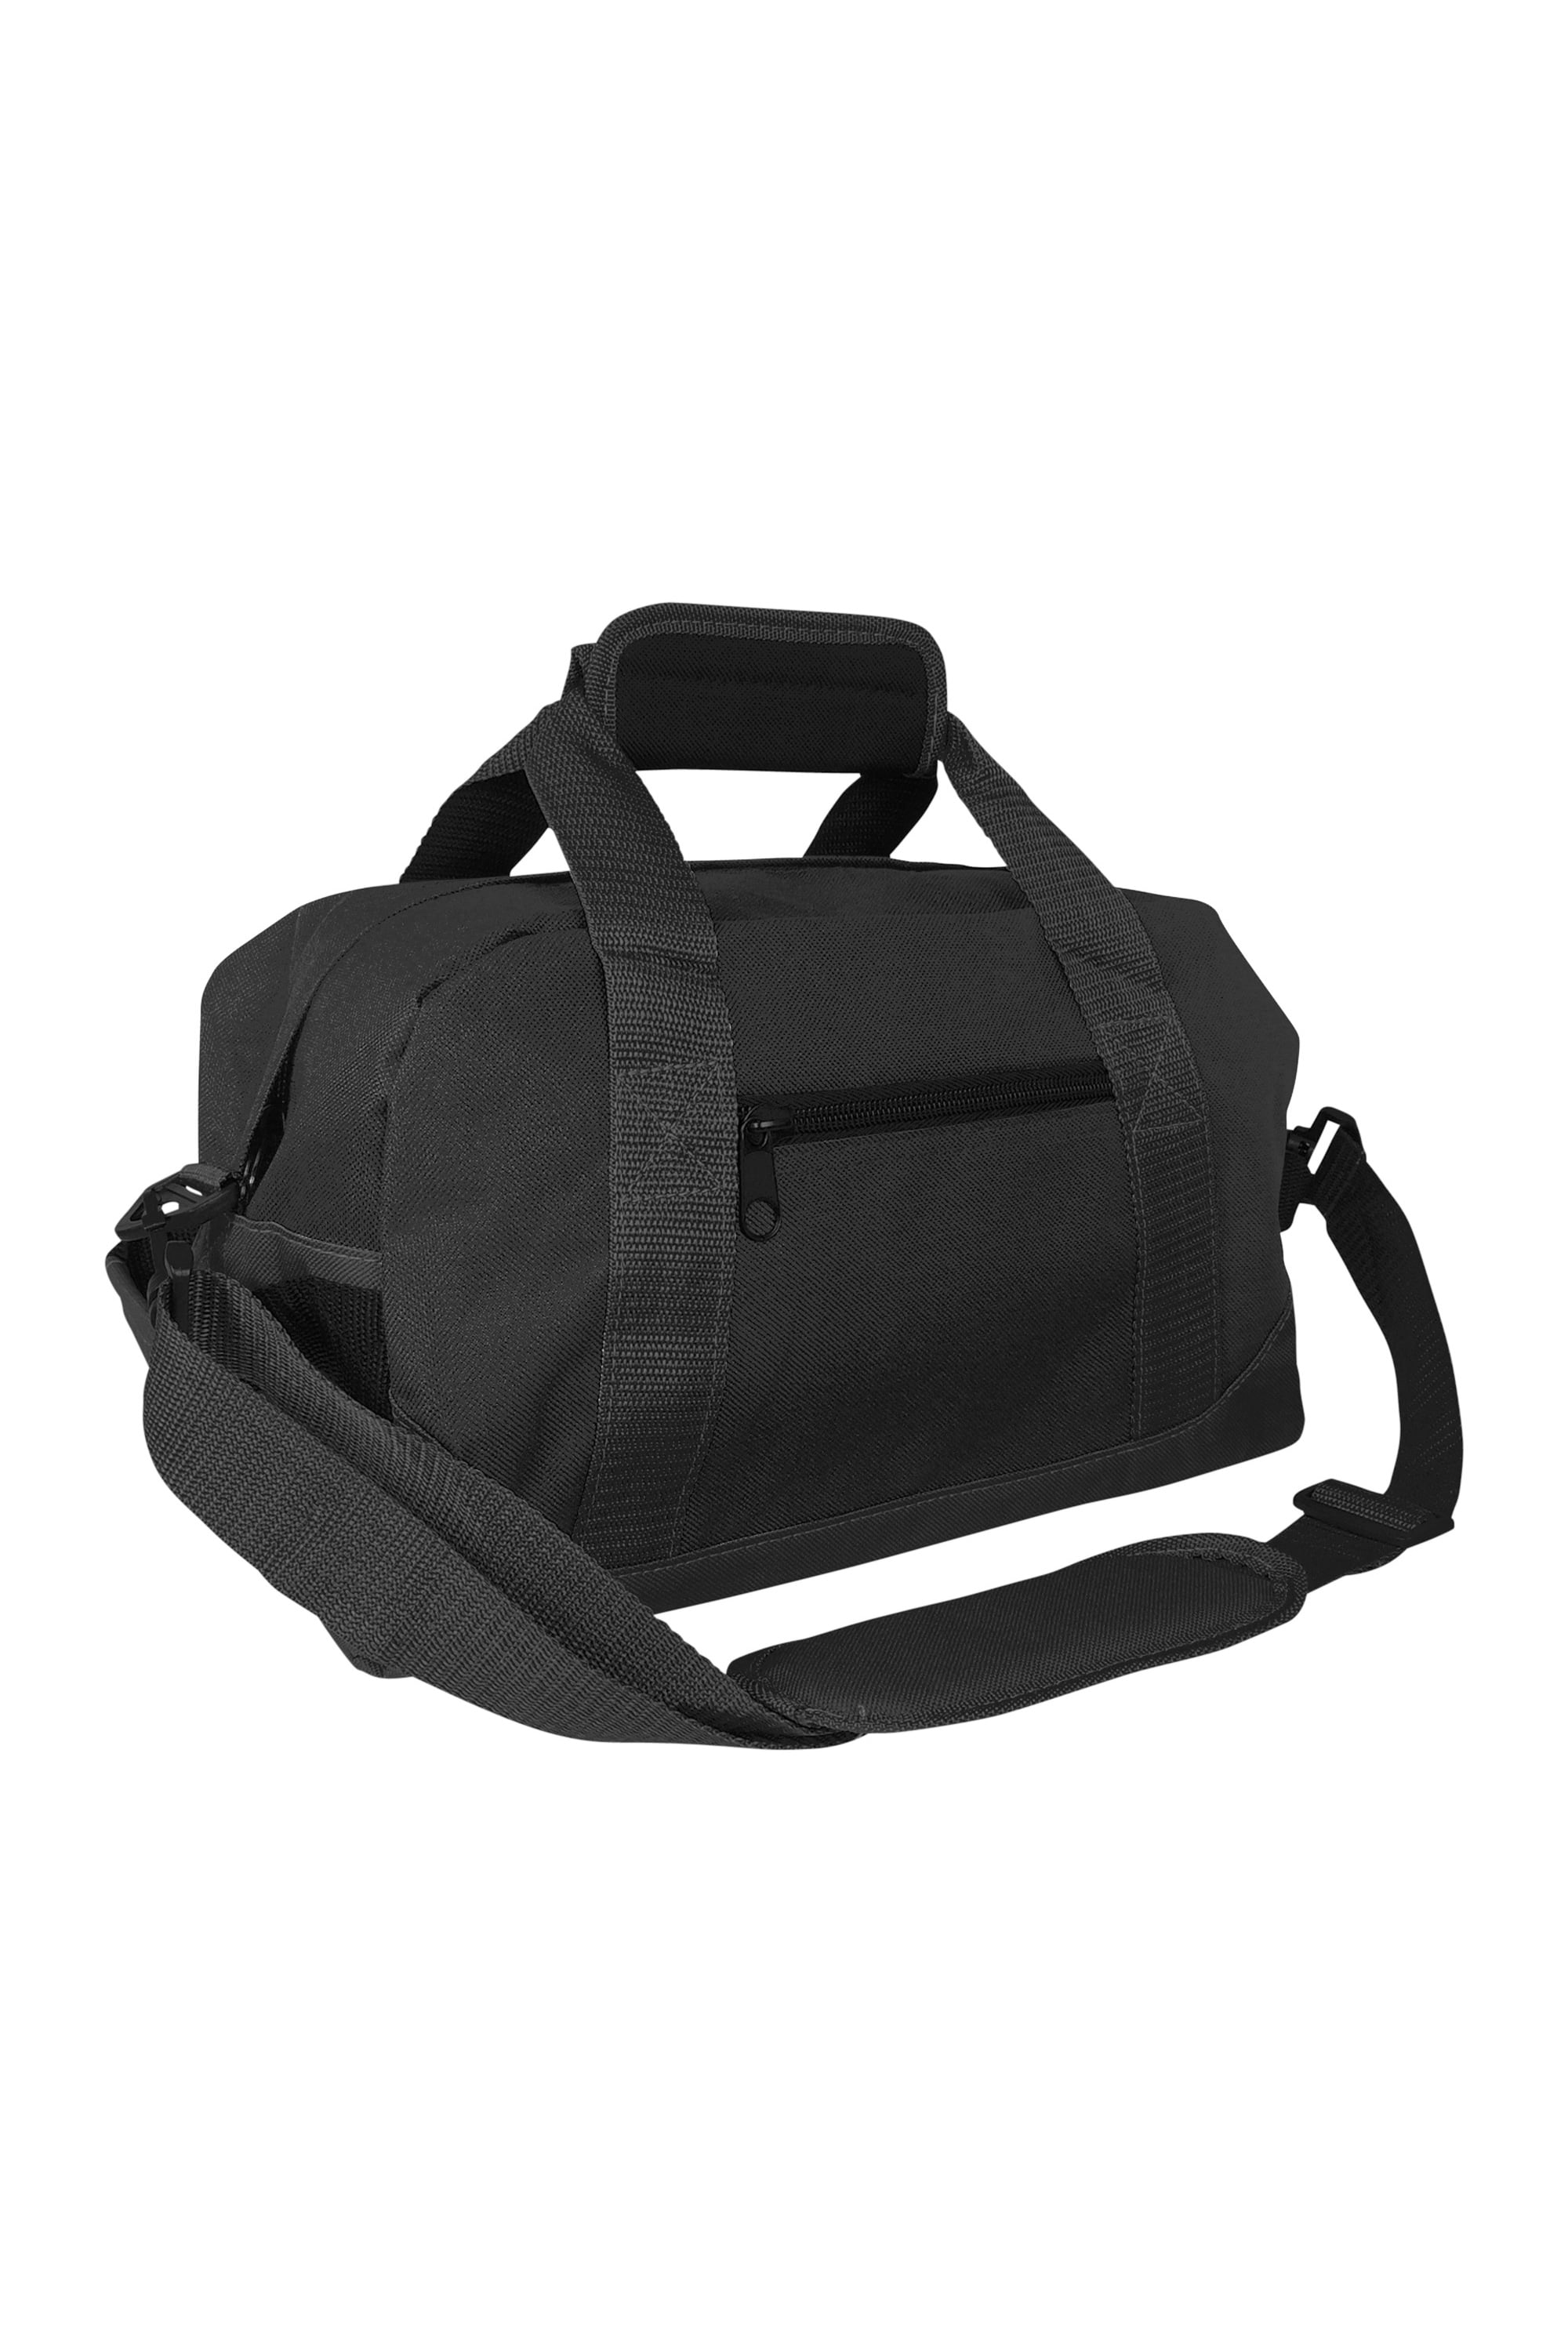 Details about   NcStar Small Duffel Bag Black 